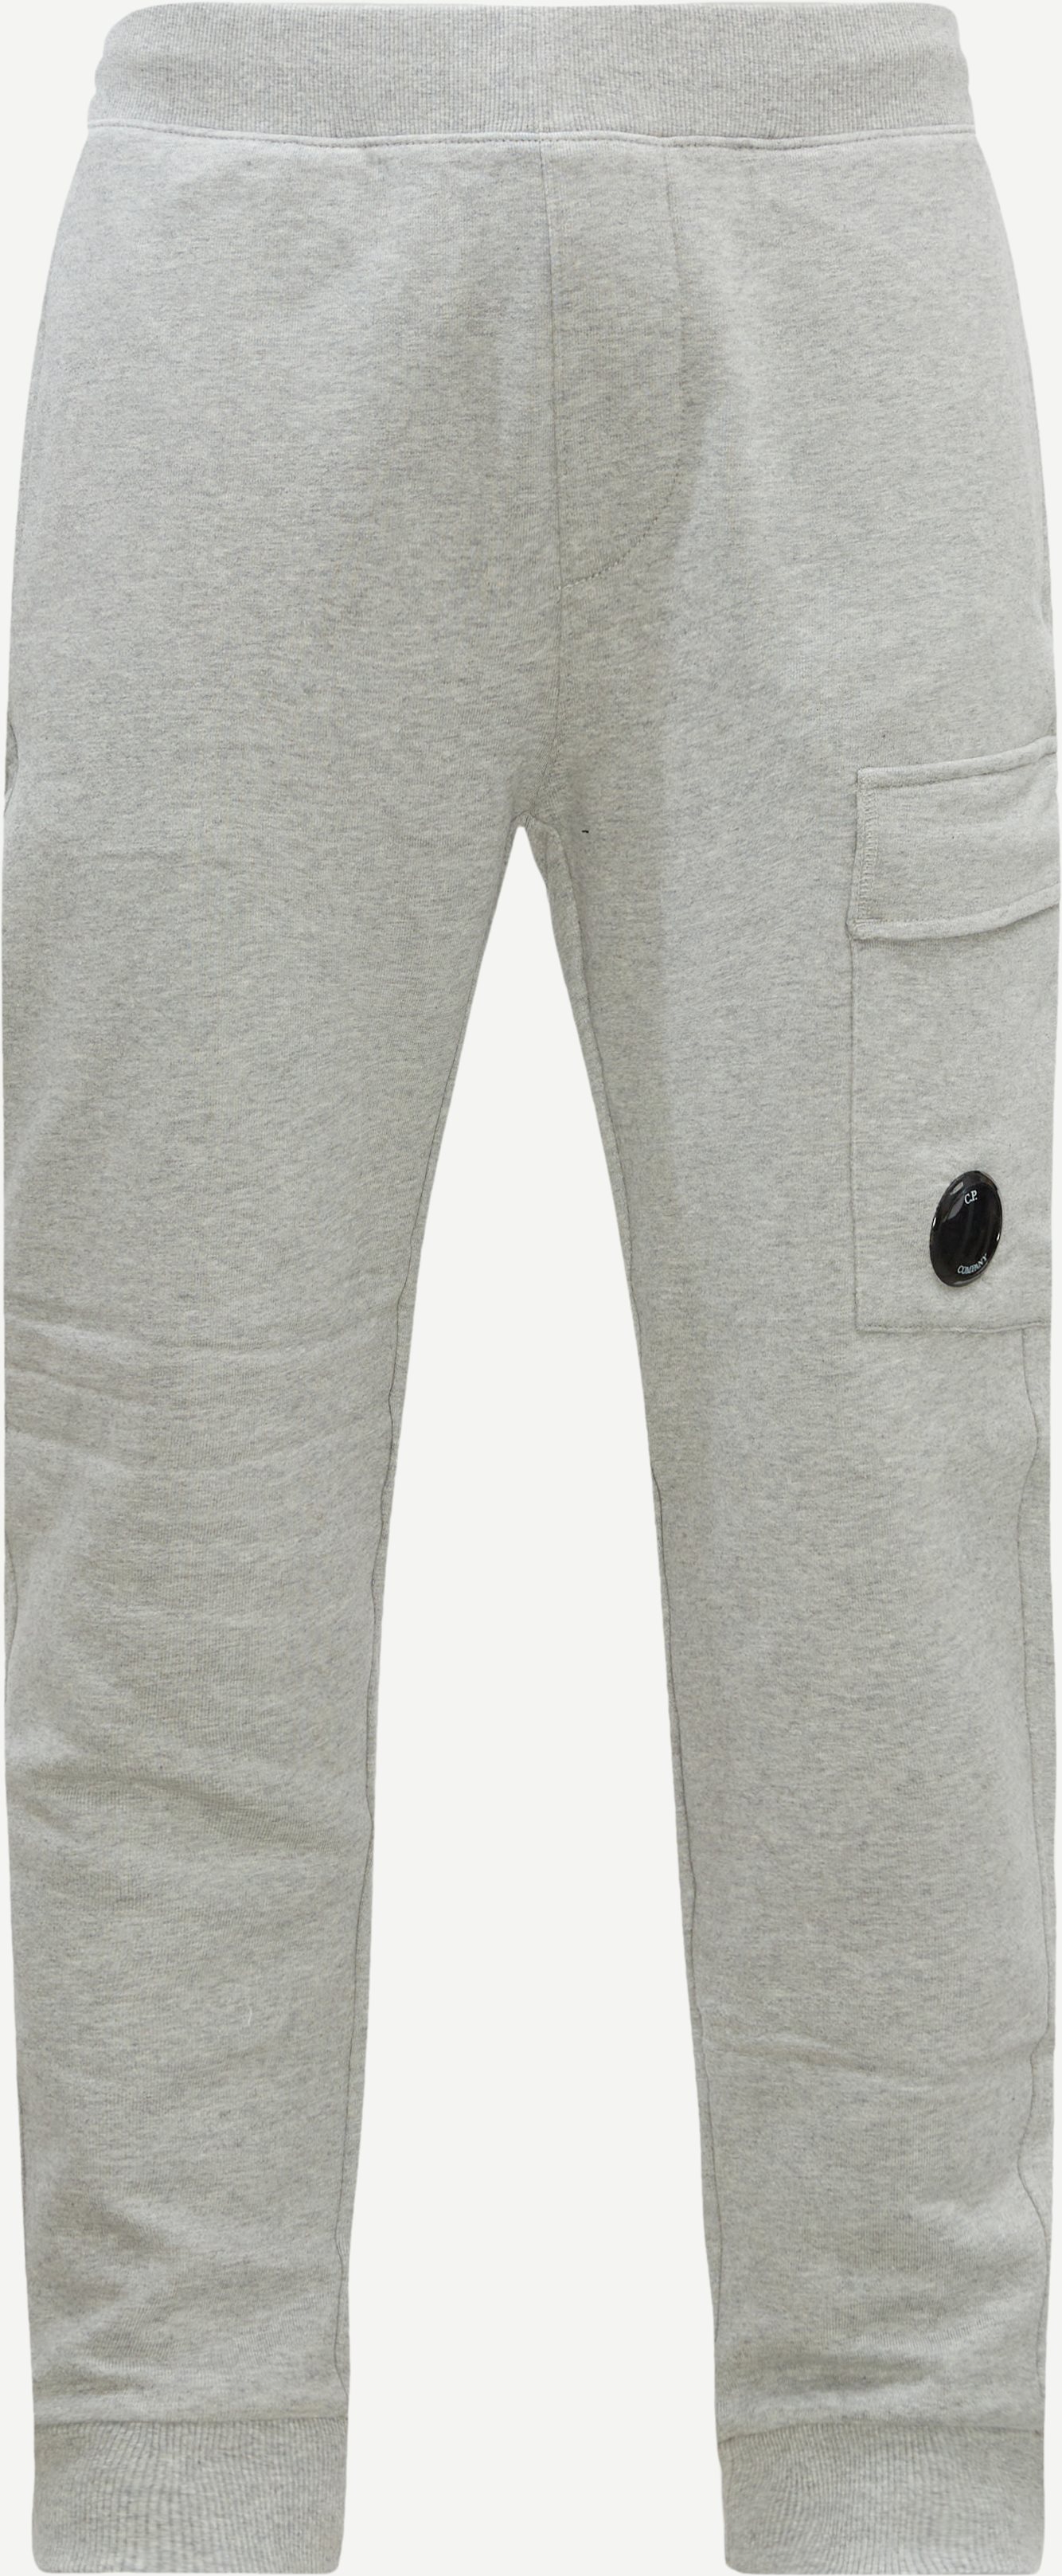 C.P. Company Trousers SP017A 005086W Grey